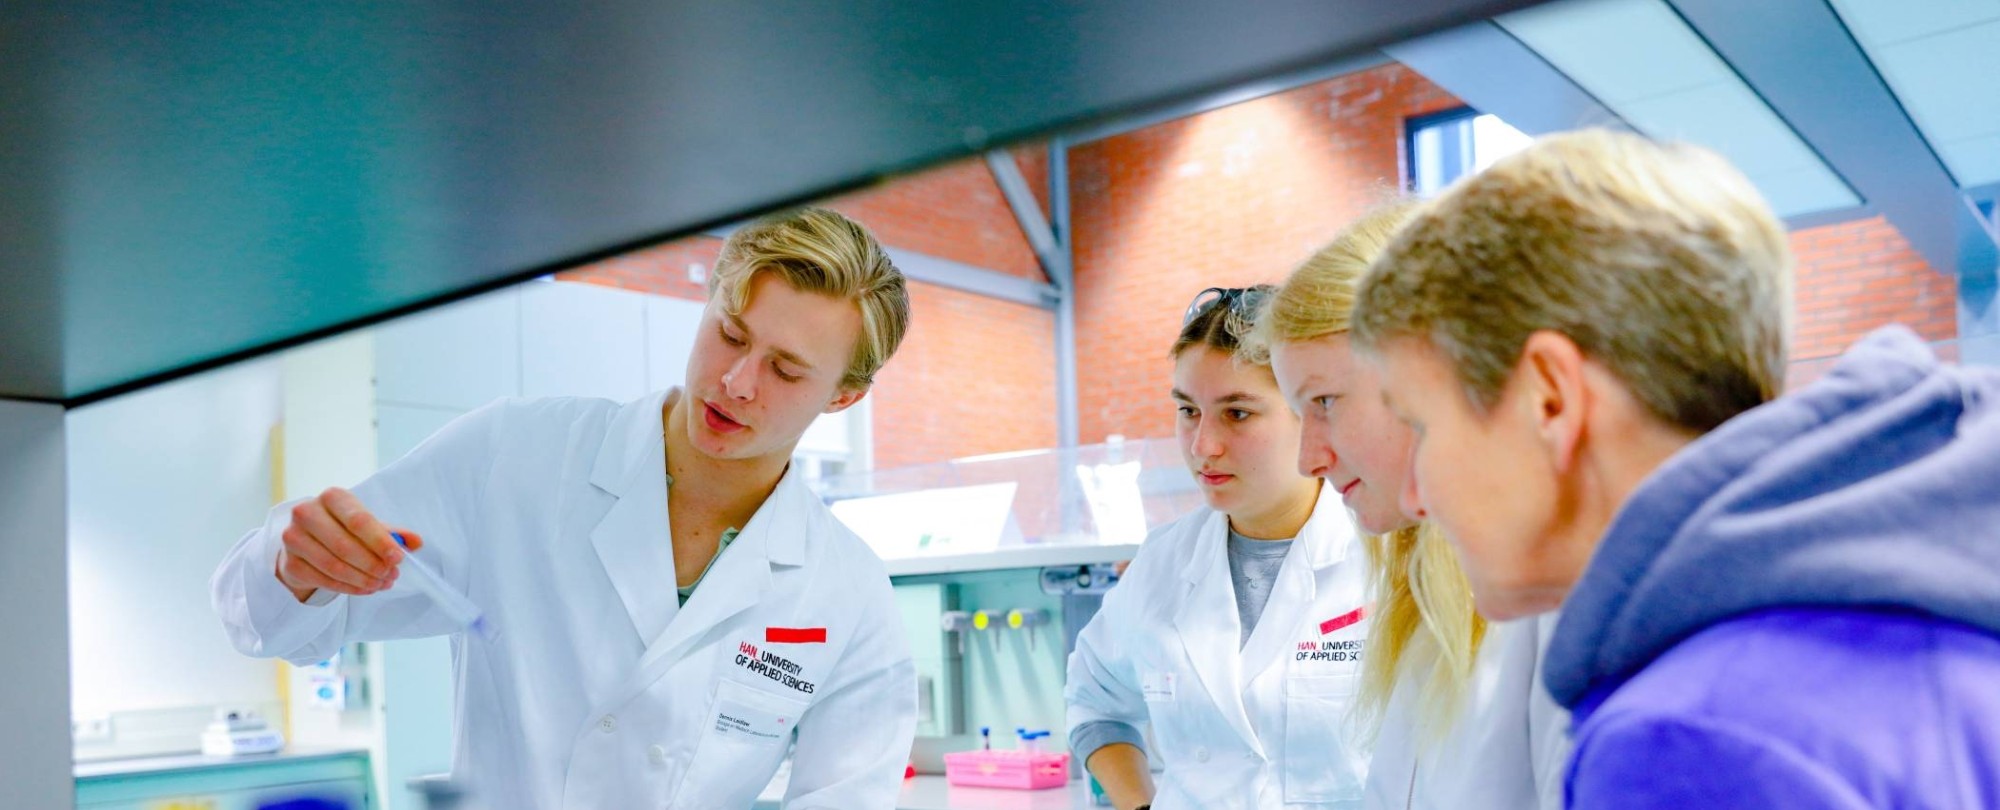 Bachelor Life Sciences in the Netherlands at HAN University of Applied Sciences